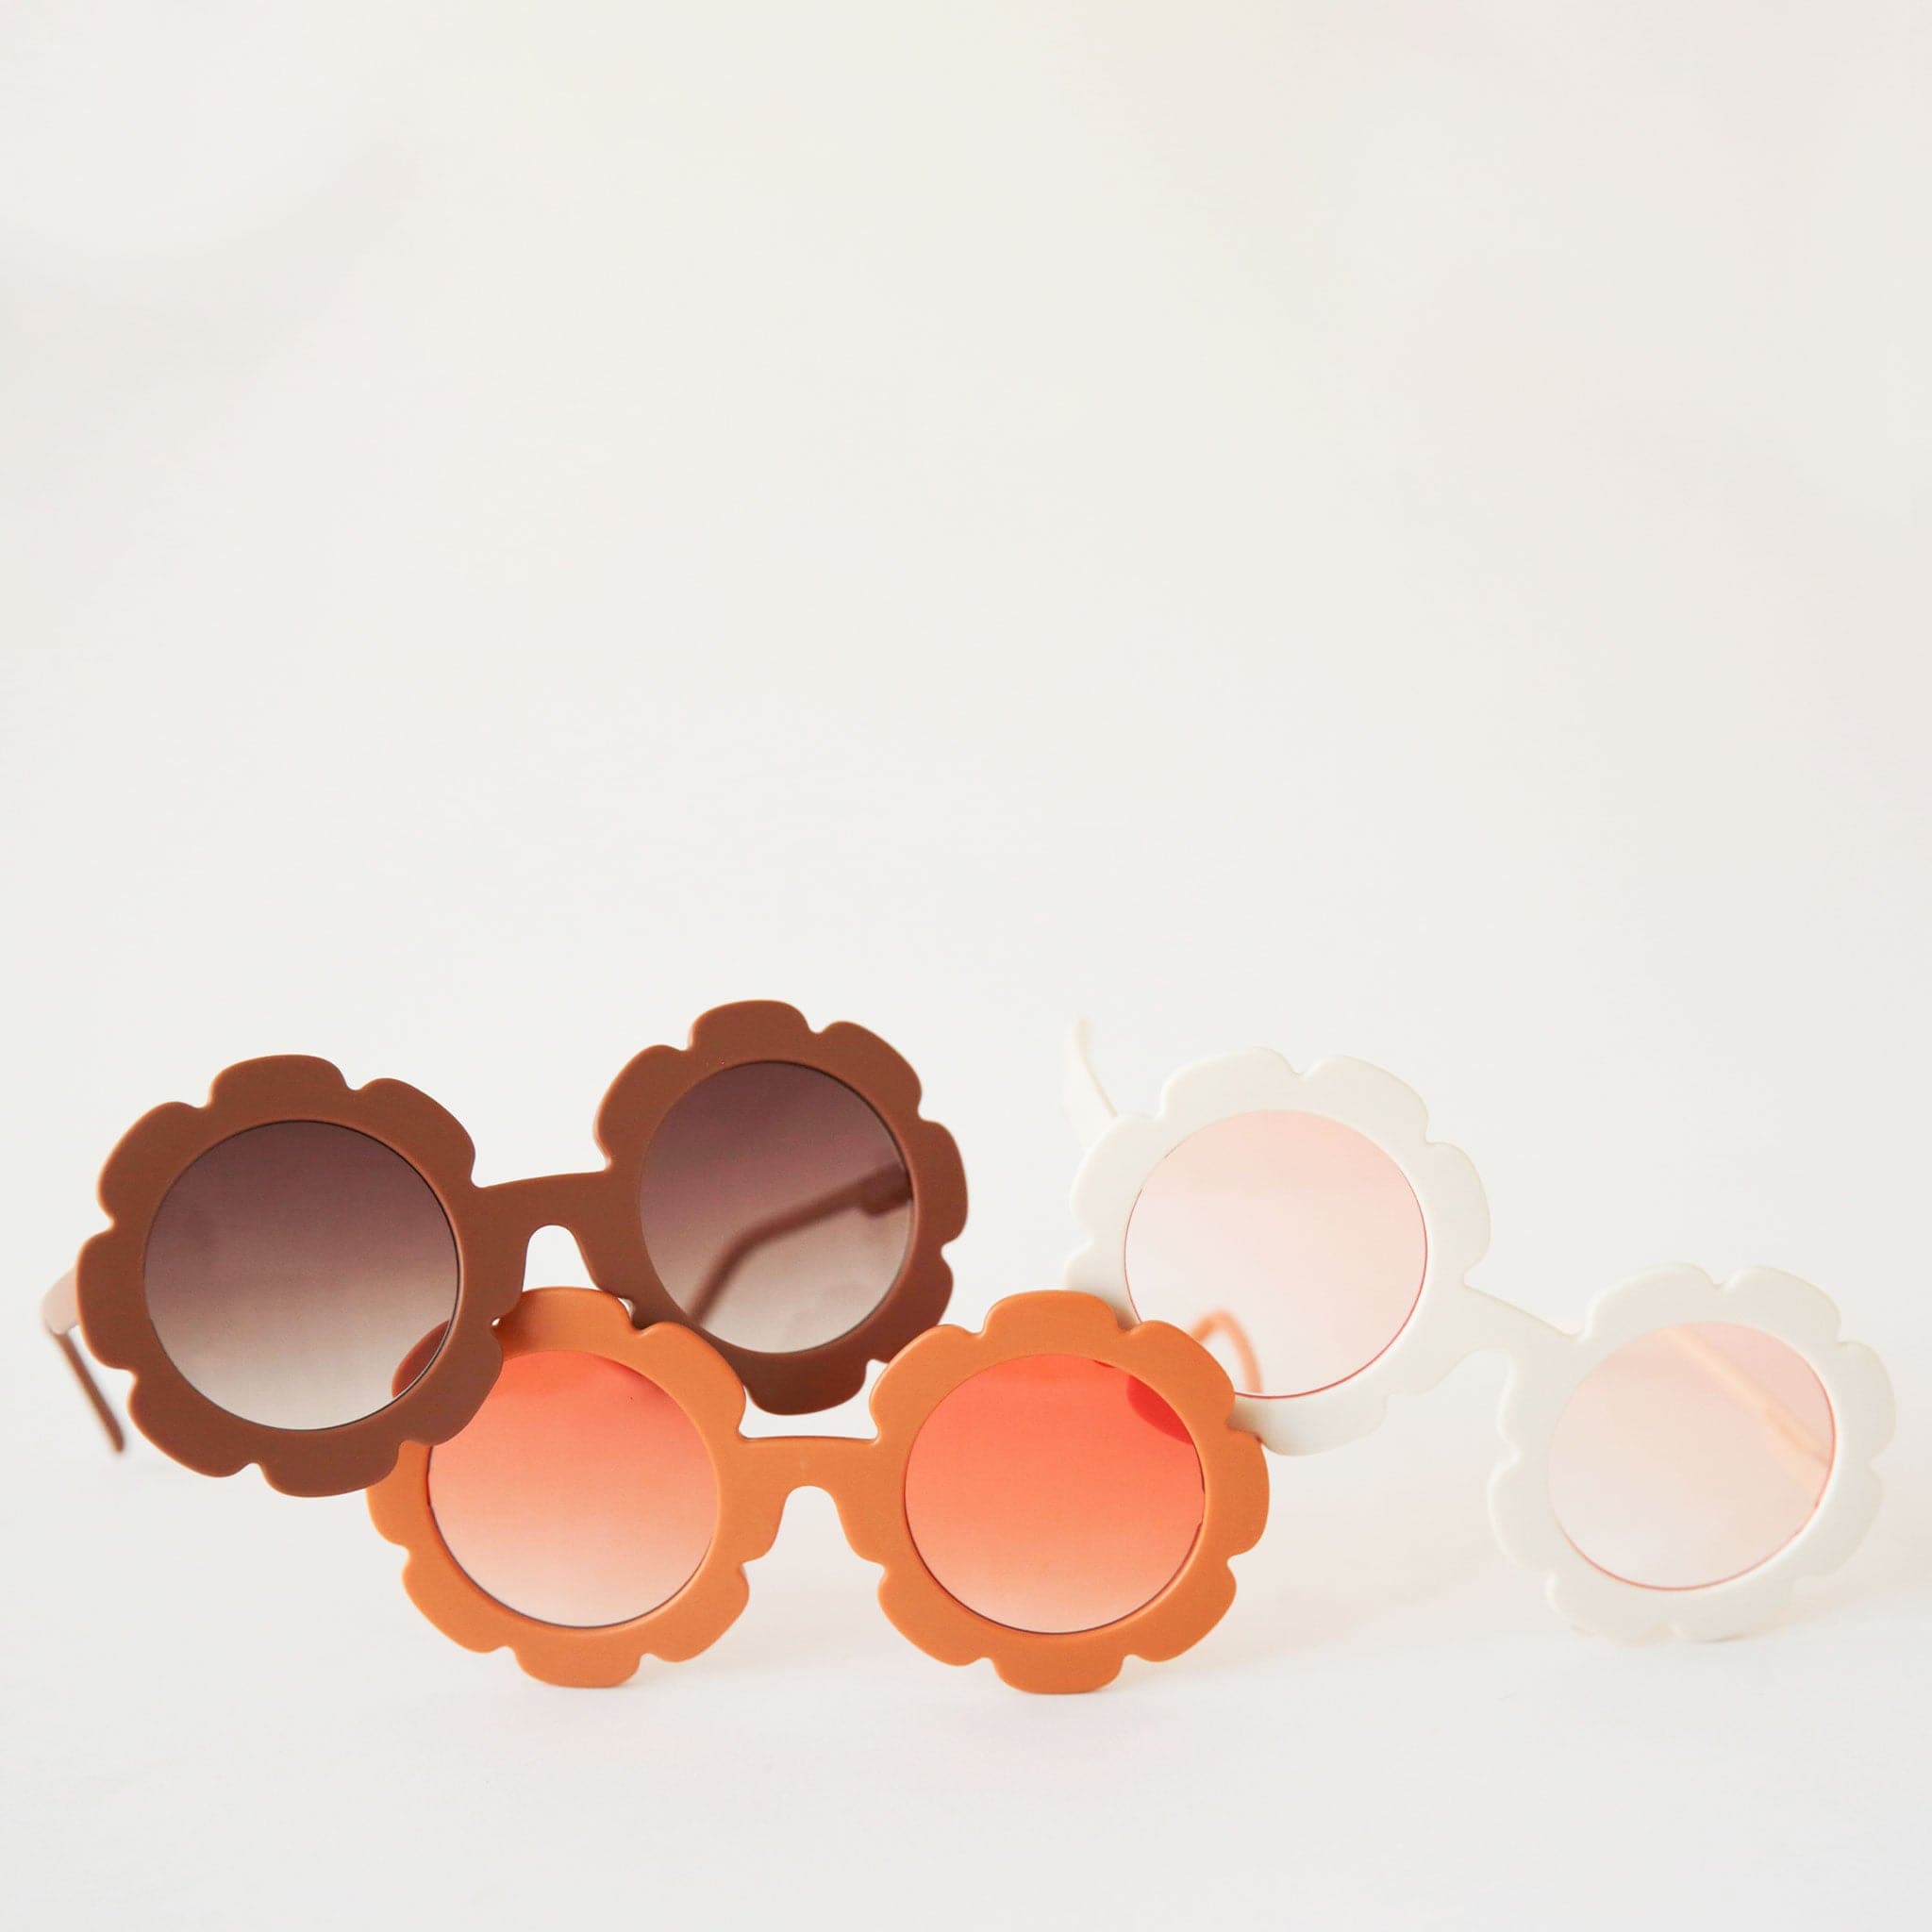 White flower shaped sunglasses with light pink lenses photographed here with the other color ways available, one a brown shade and the other an orange frame with orange orange lenses.